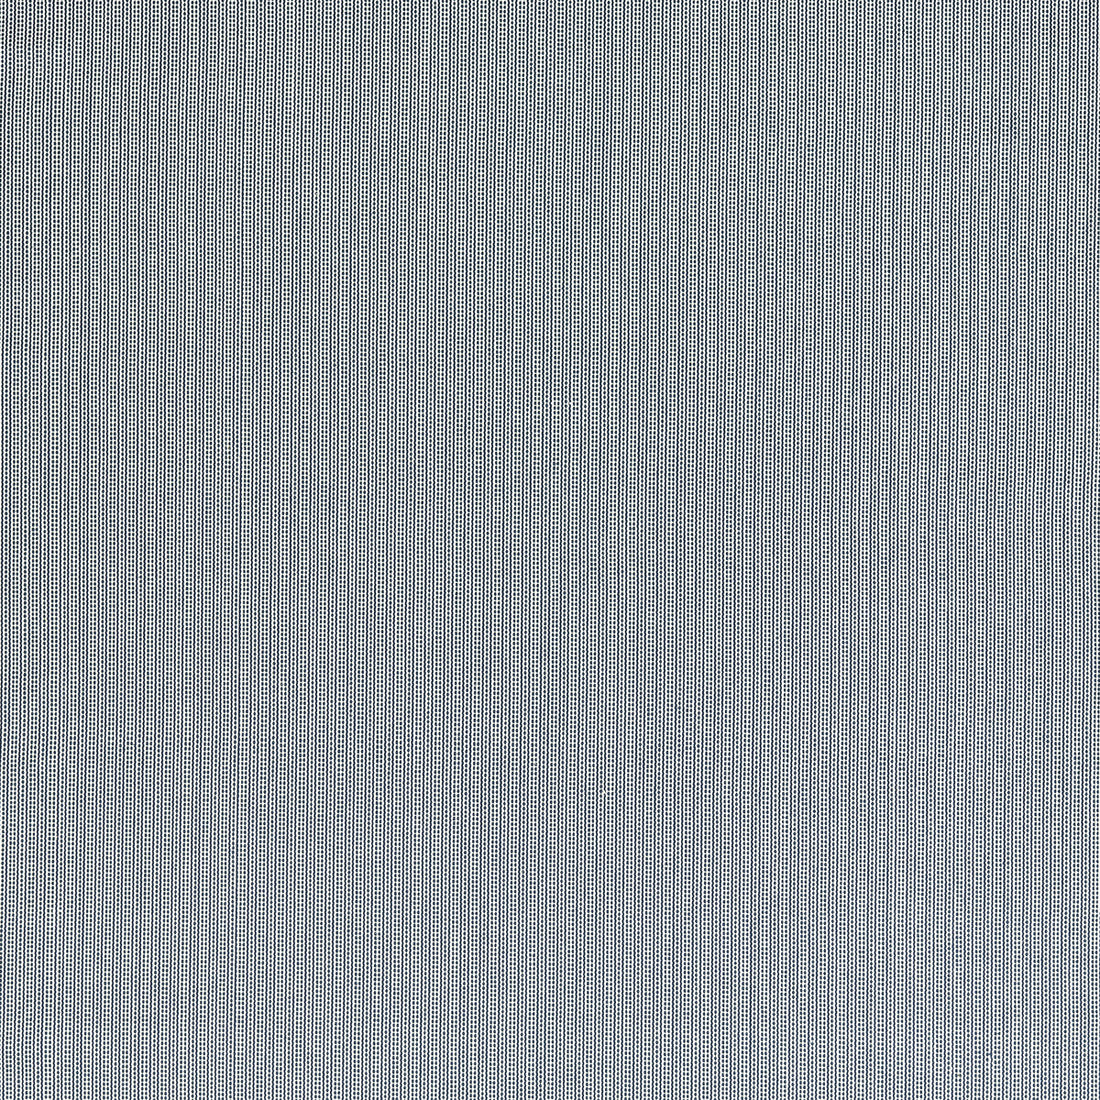 Spencer fabric in denim color - pattern F1504/01.CAC.0 - by Clarke And Clarke in the Clarke &amp; Clarke Edgeworth collection